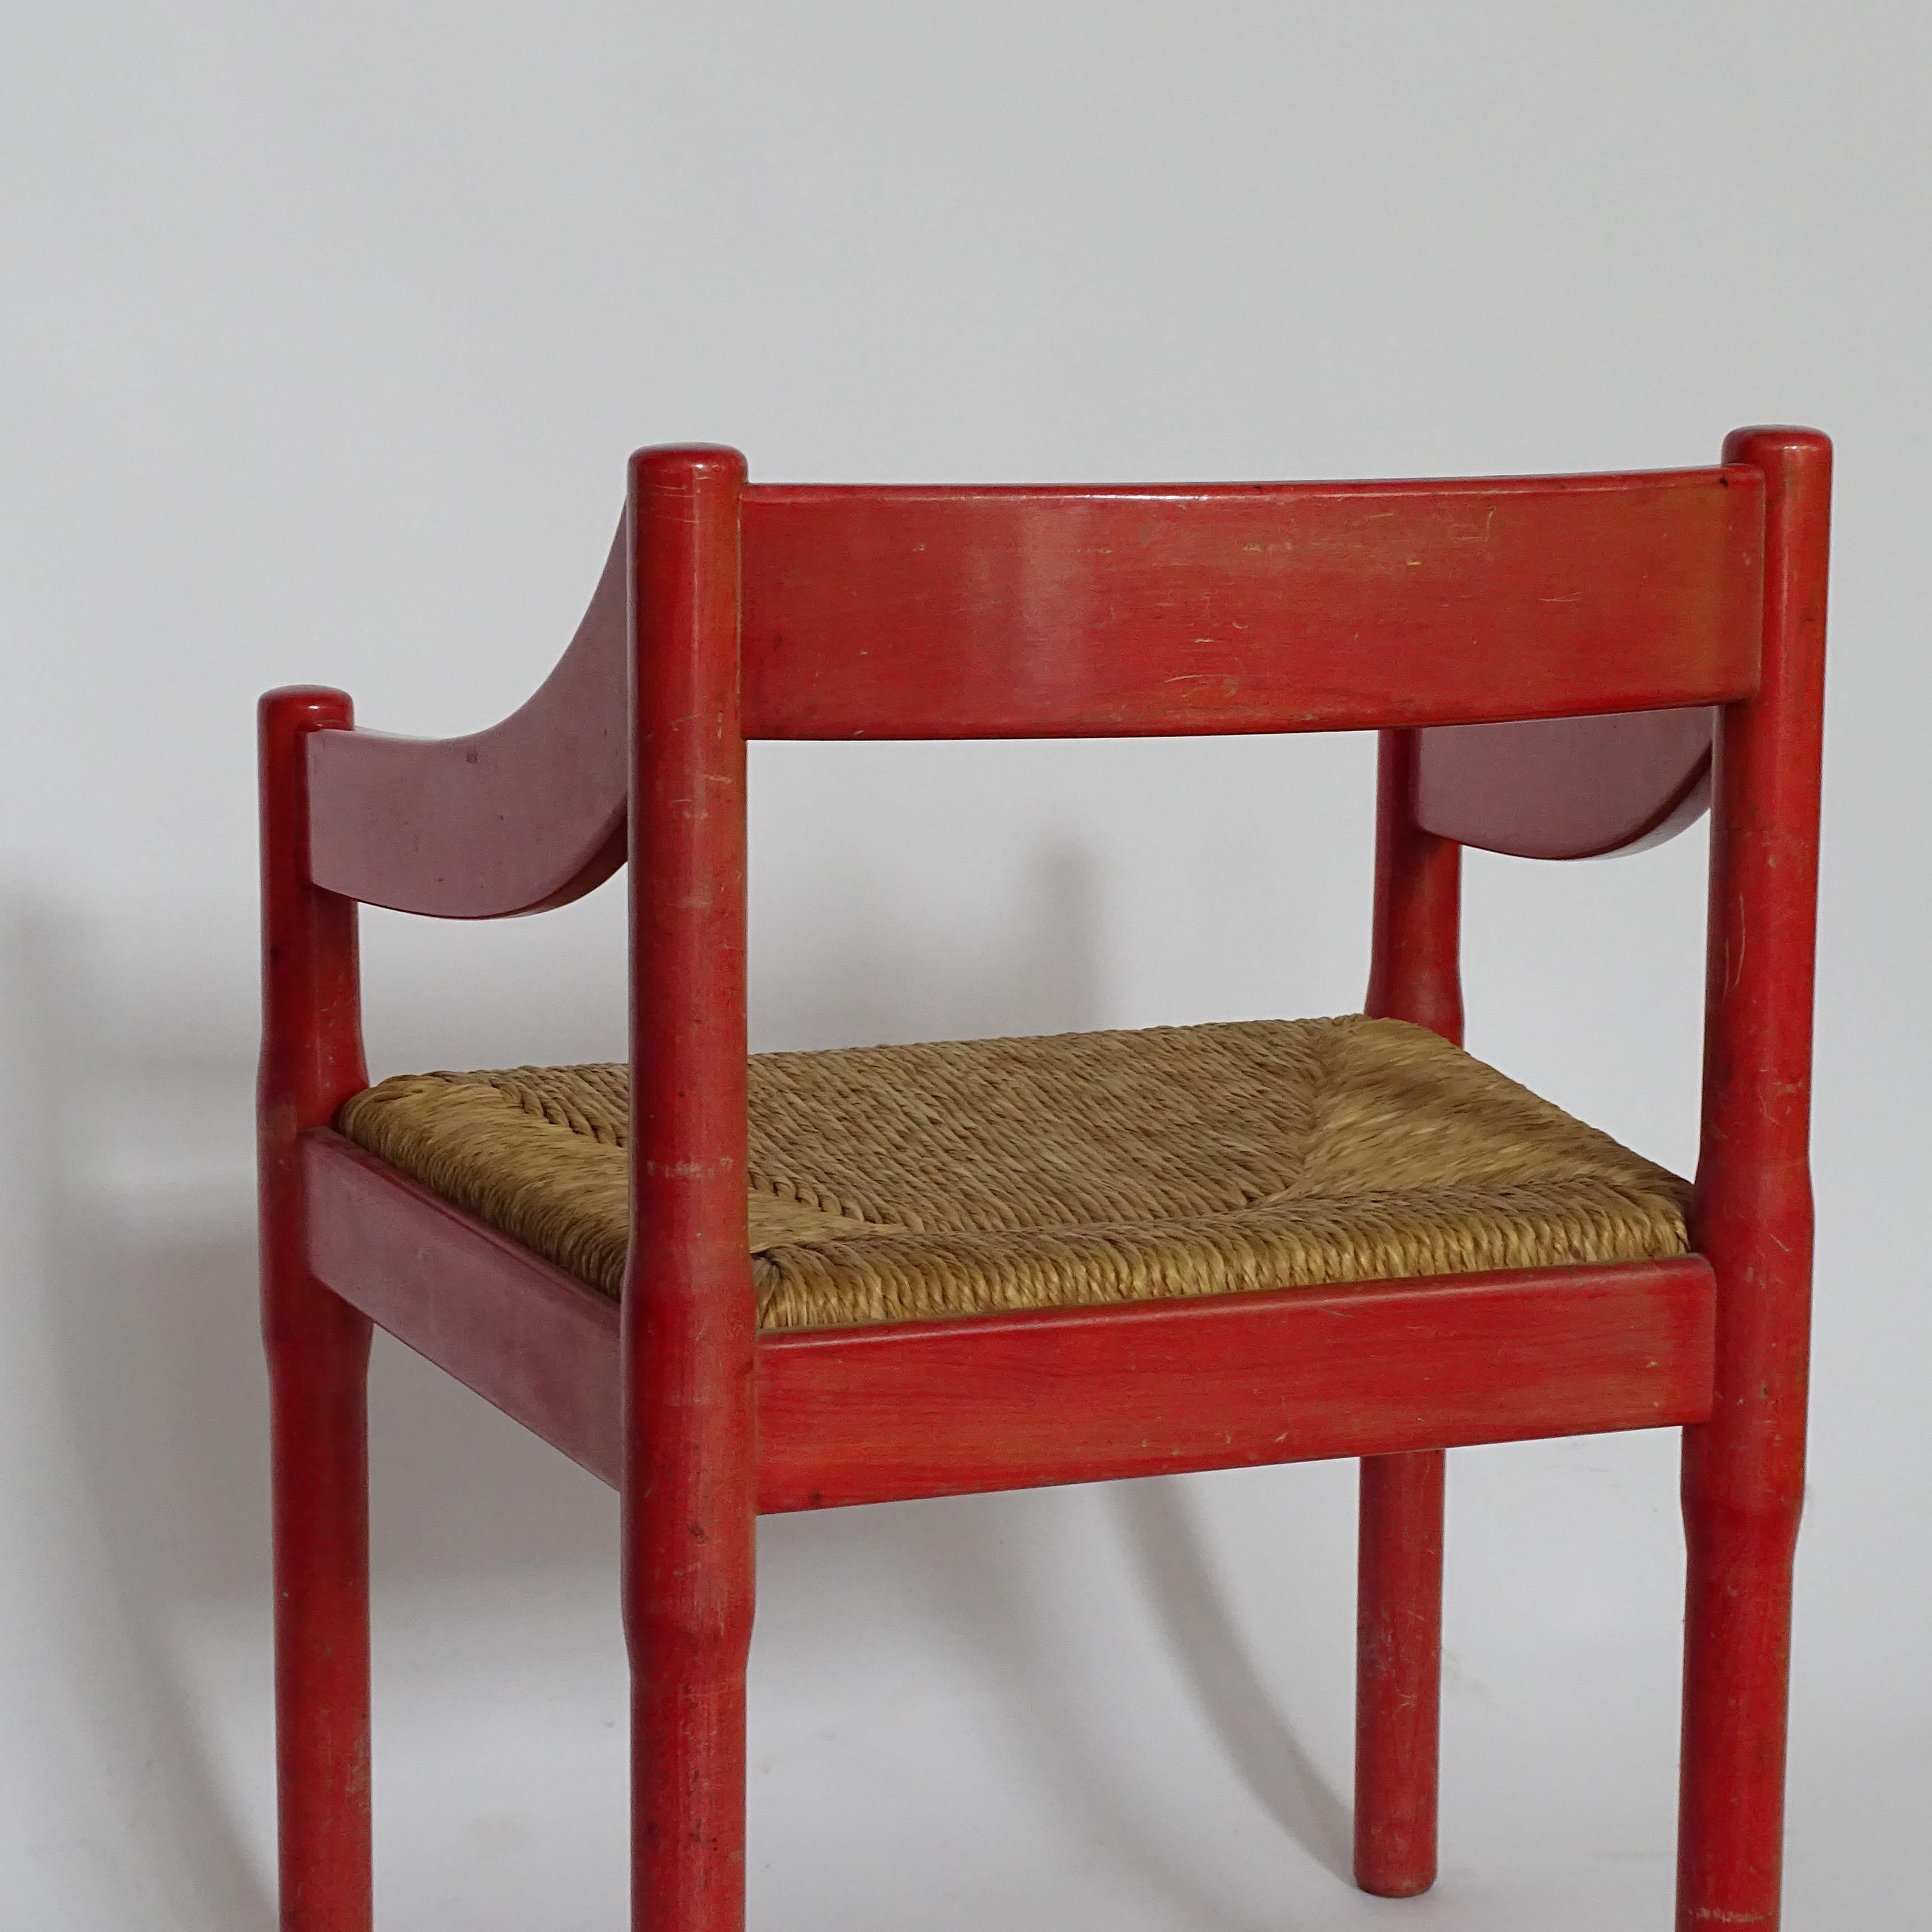 Vico Magistretti Pair of Red Carimate Armchairs for Cassina, Italy, 1961 For Sale 2